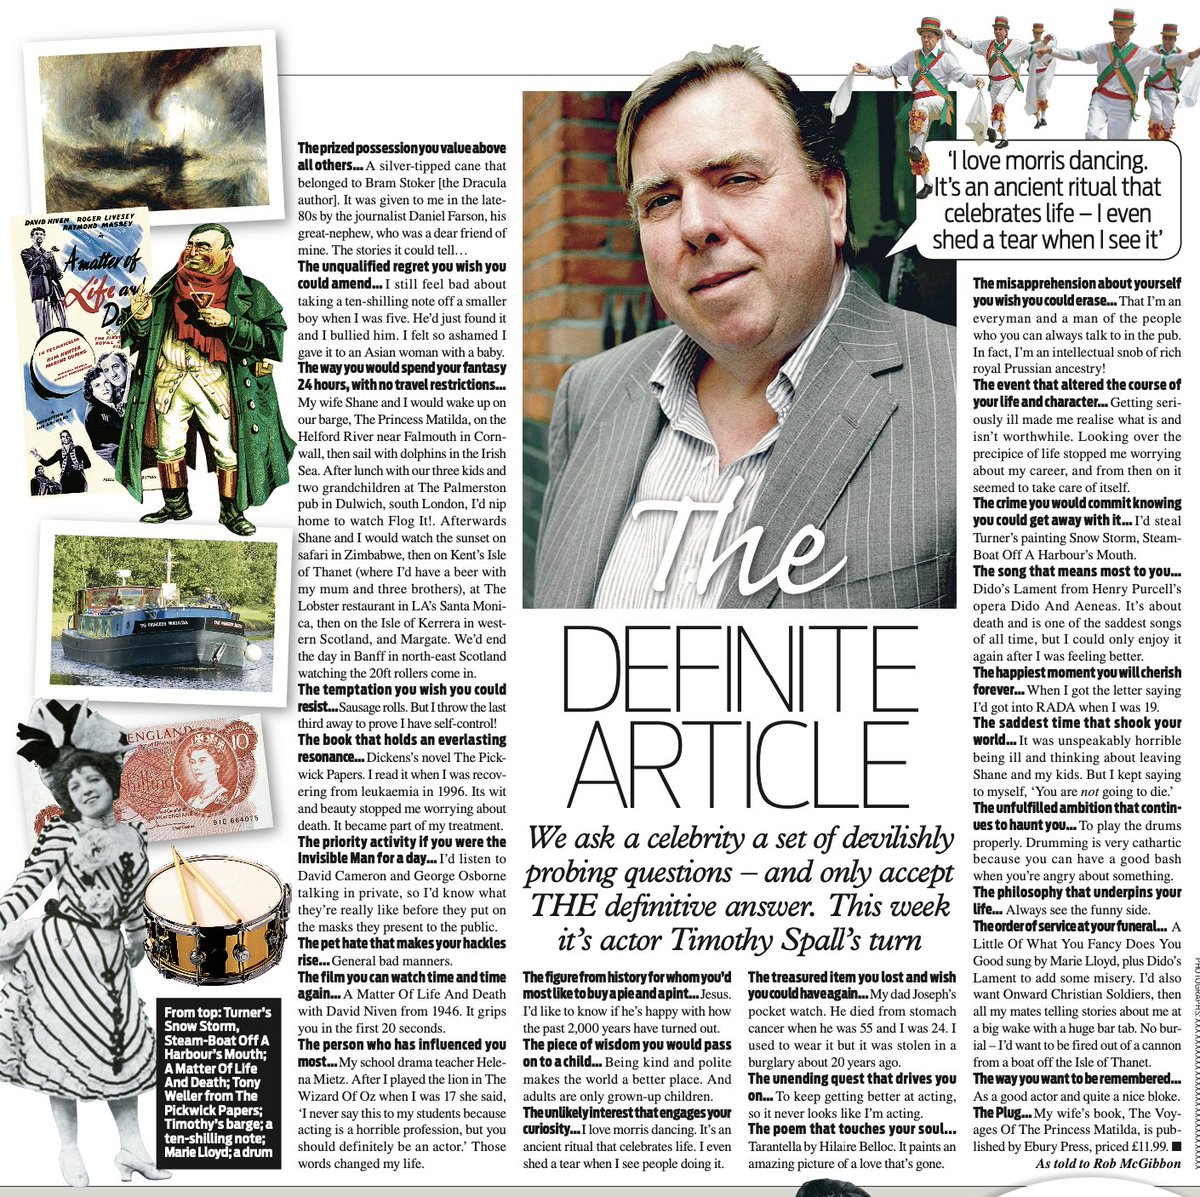 Tim Spall  is a very popular man in luvvie land. He is certainly an interesting and fun guy to interview. Have always fondly remembered our chat for The Definite Article in 2012. His fatter days. #timothyspall

robmcgibbon.com/wp-content/upl…